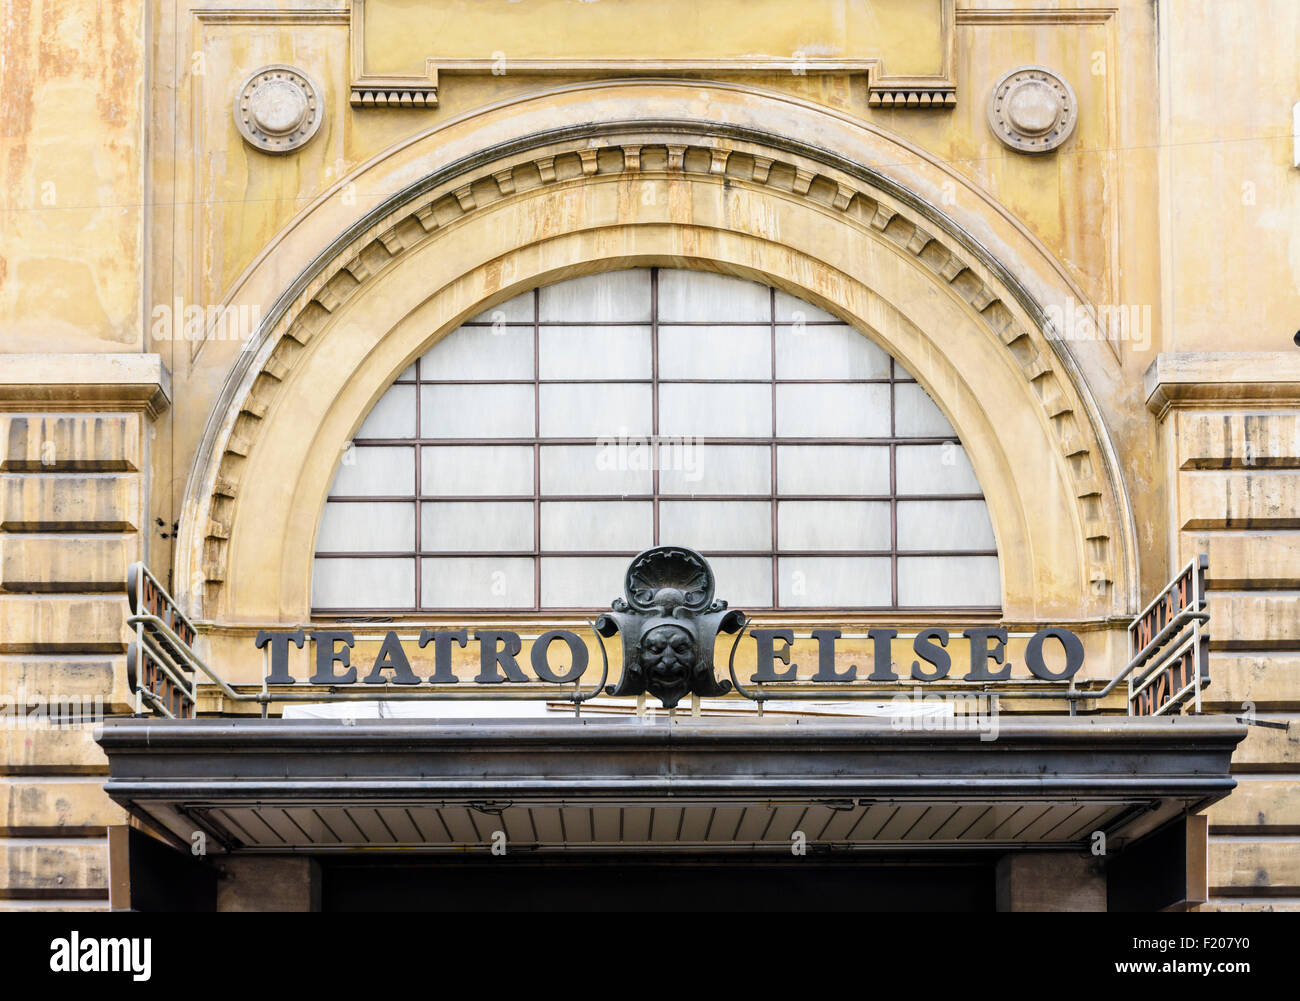 Teatro eliseo hi-res stock photography and images - Alamy